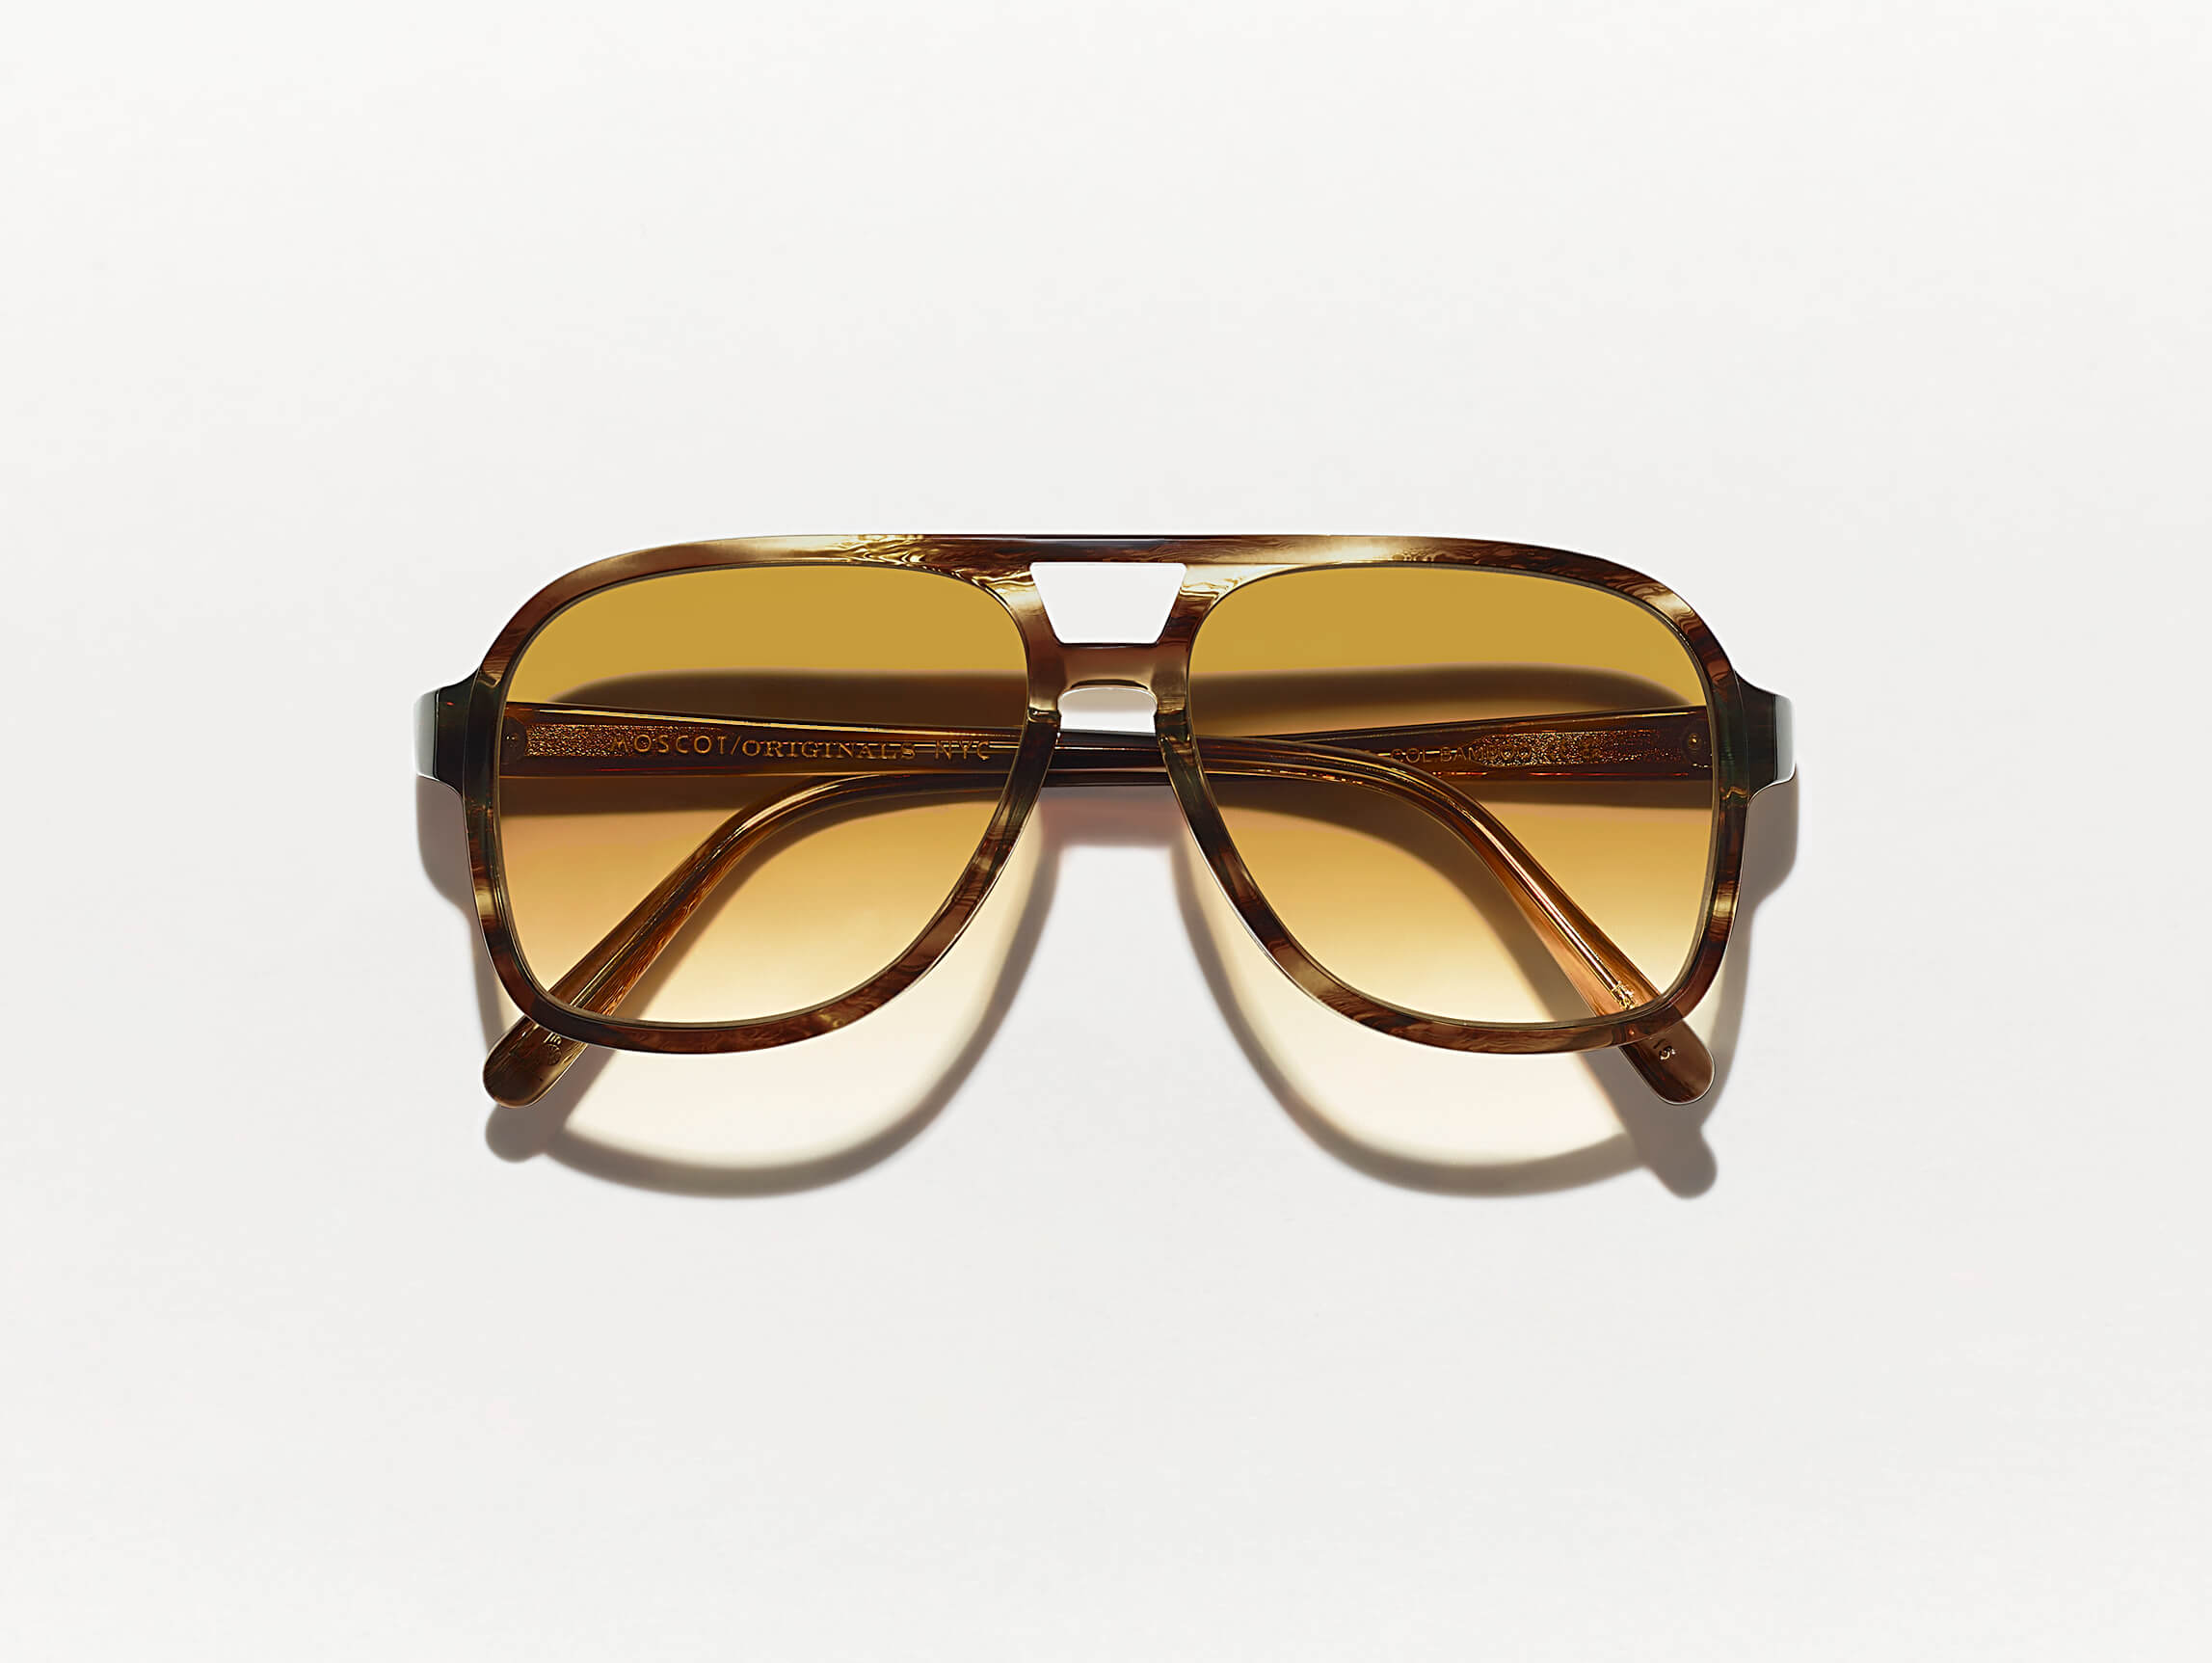 The SHEISTER SUN in Bamboo with Chestnut Fade Tinted Lenses